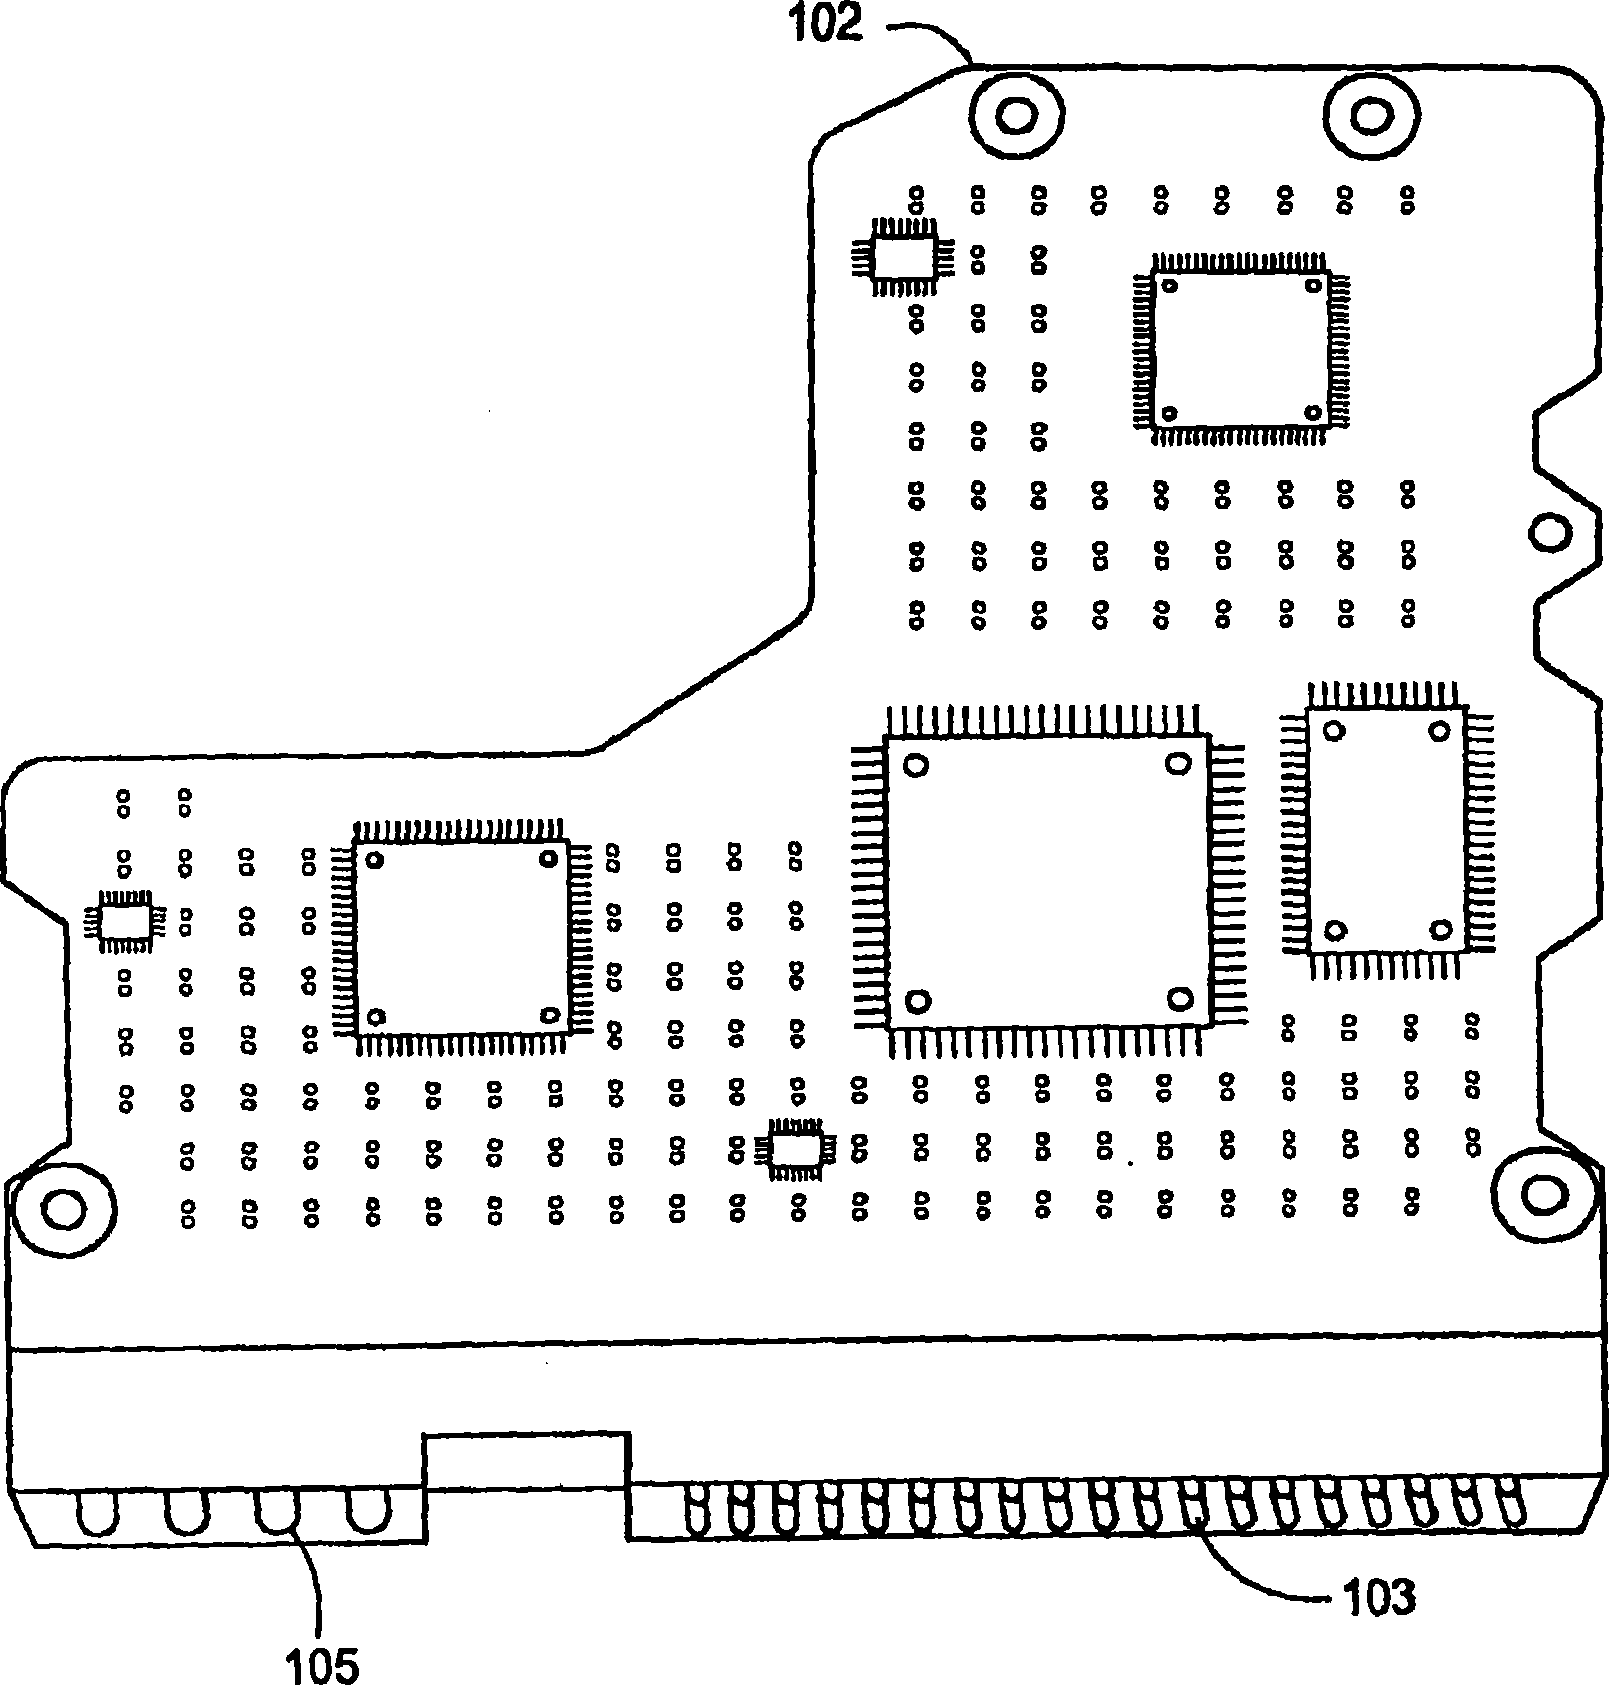 Storage device with a native RJ-45 connector